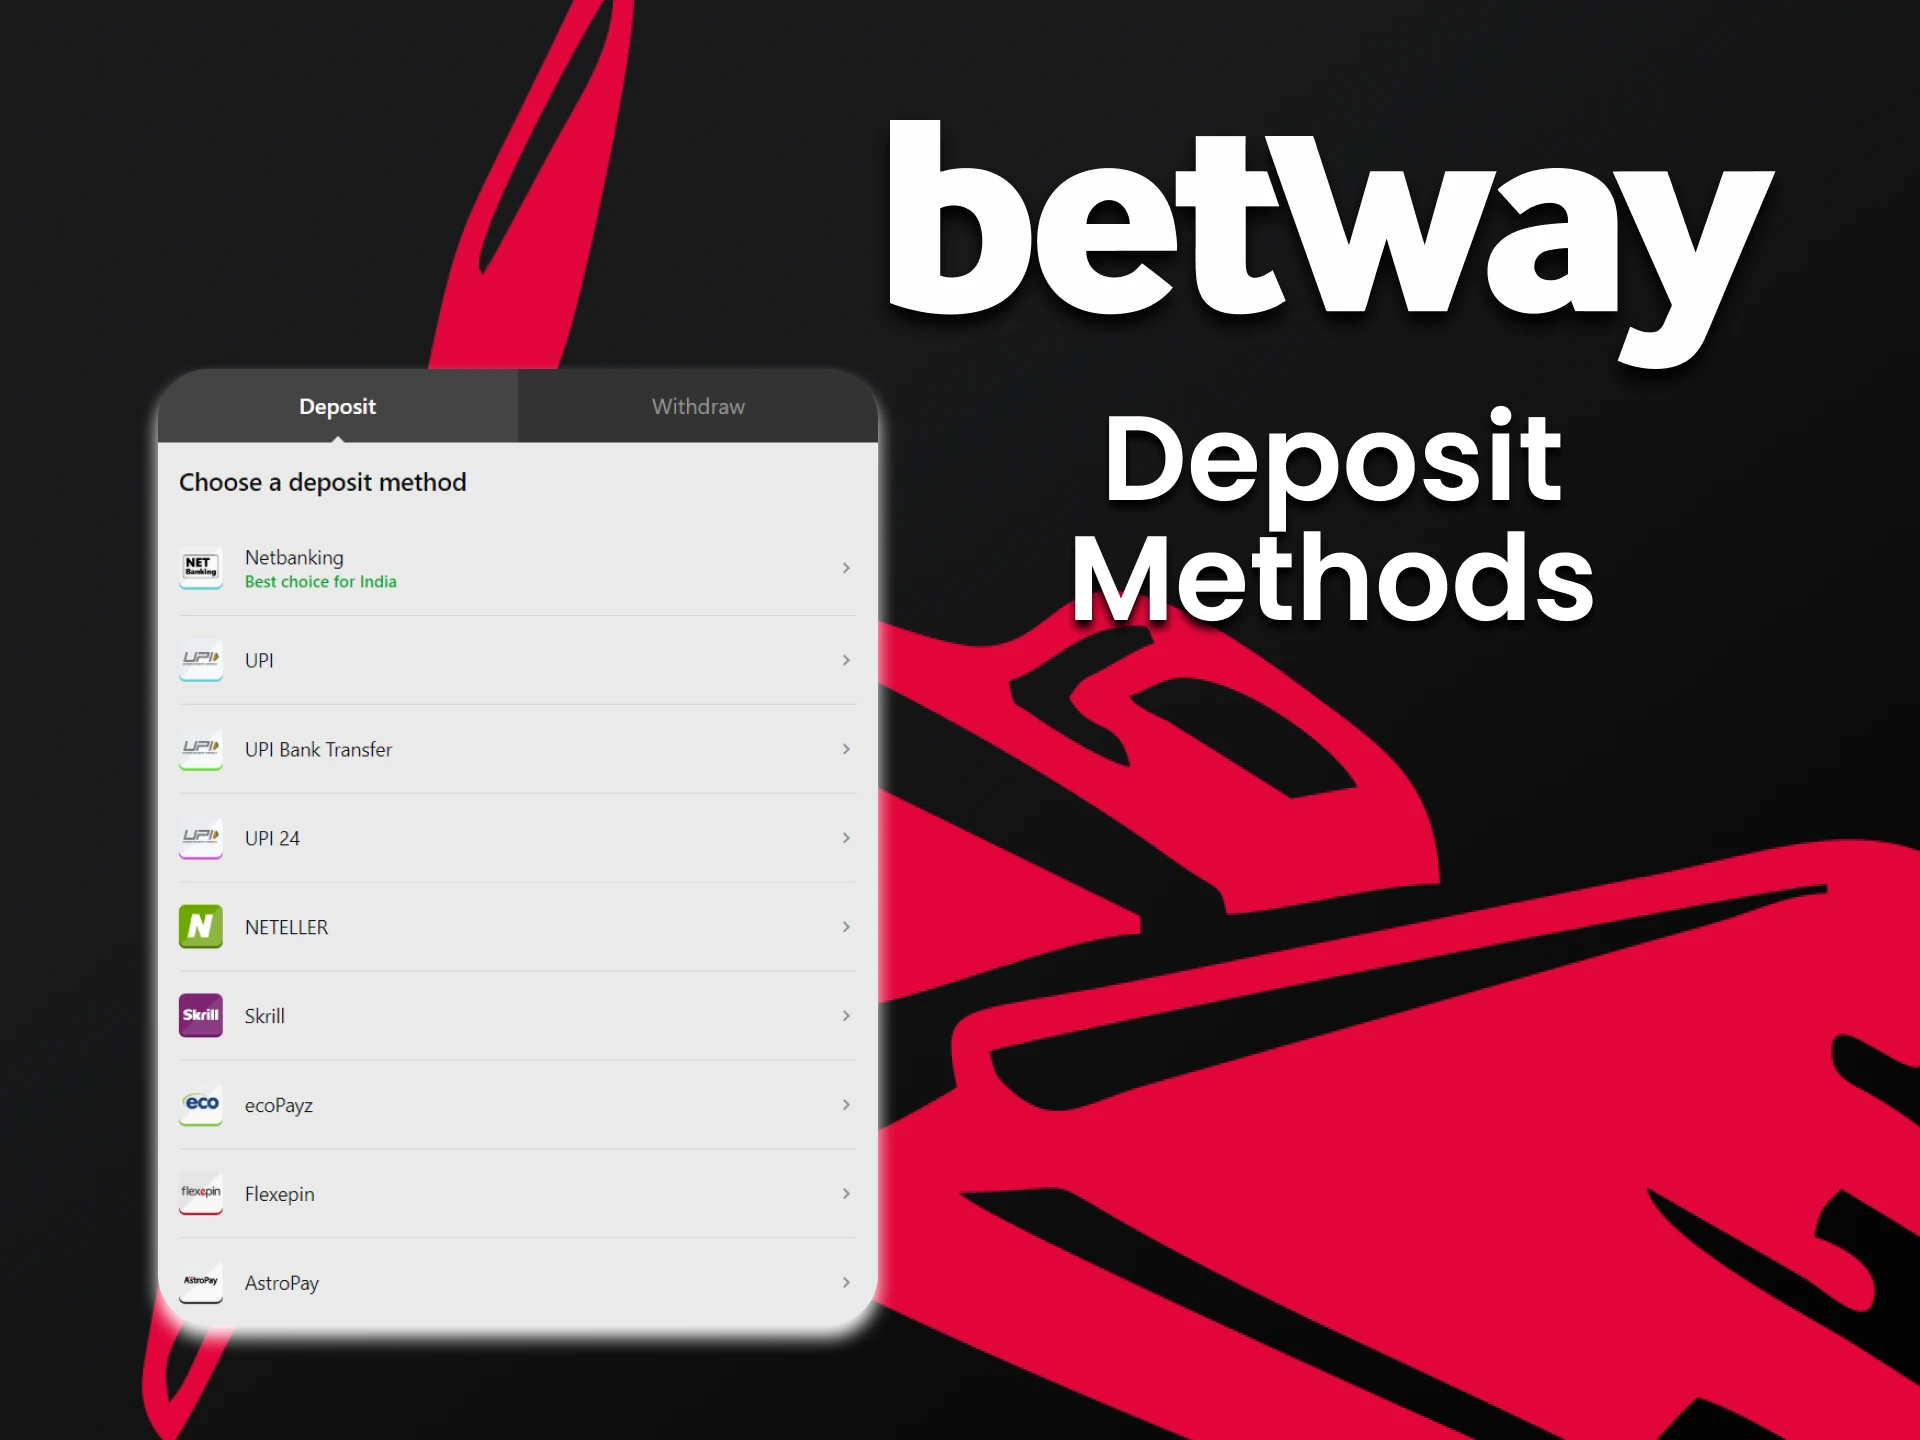 Betway provides a variety of deposit options for playing Aviator.